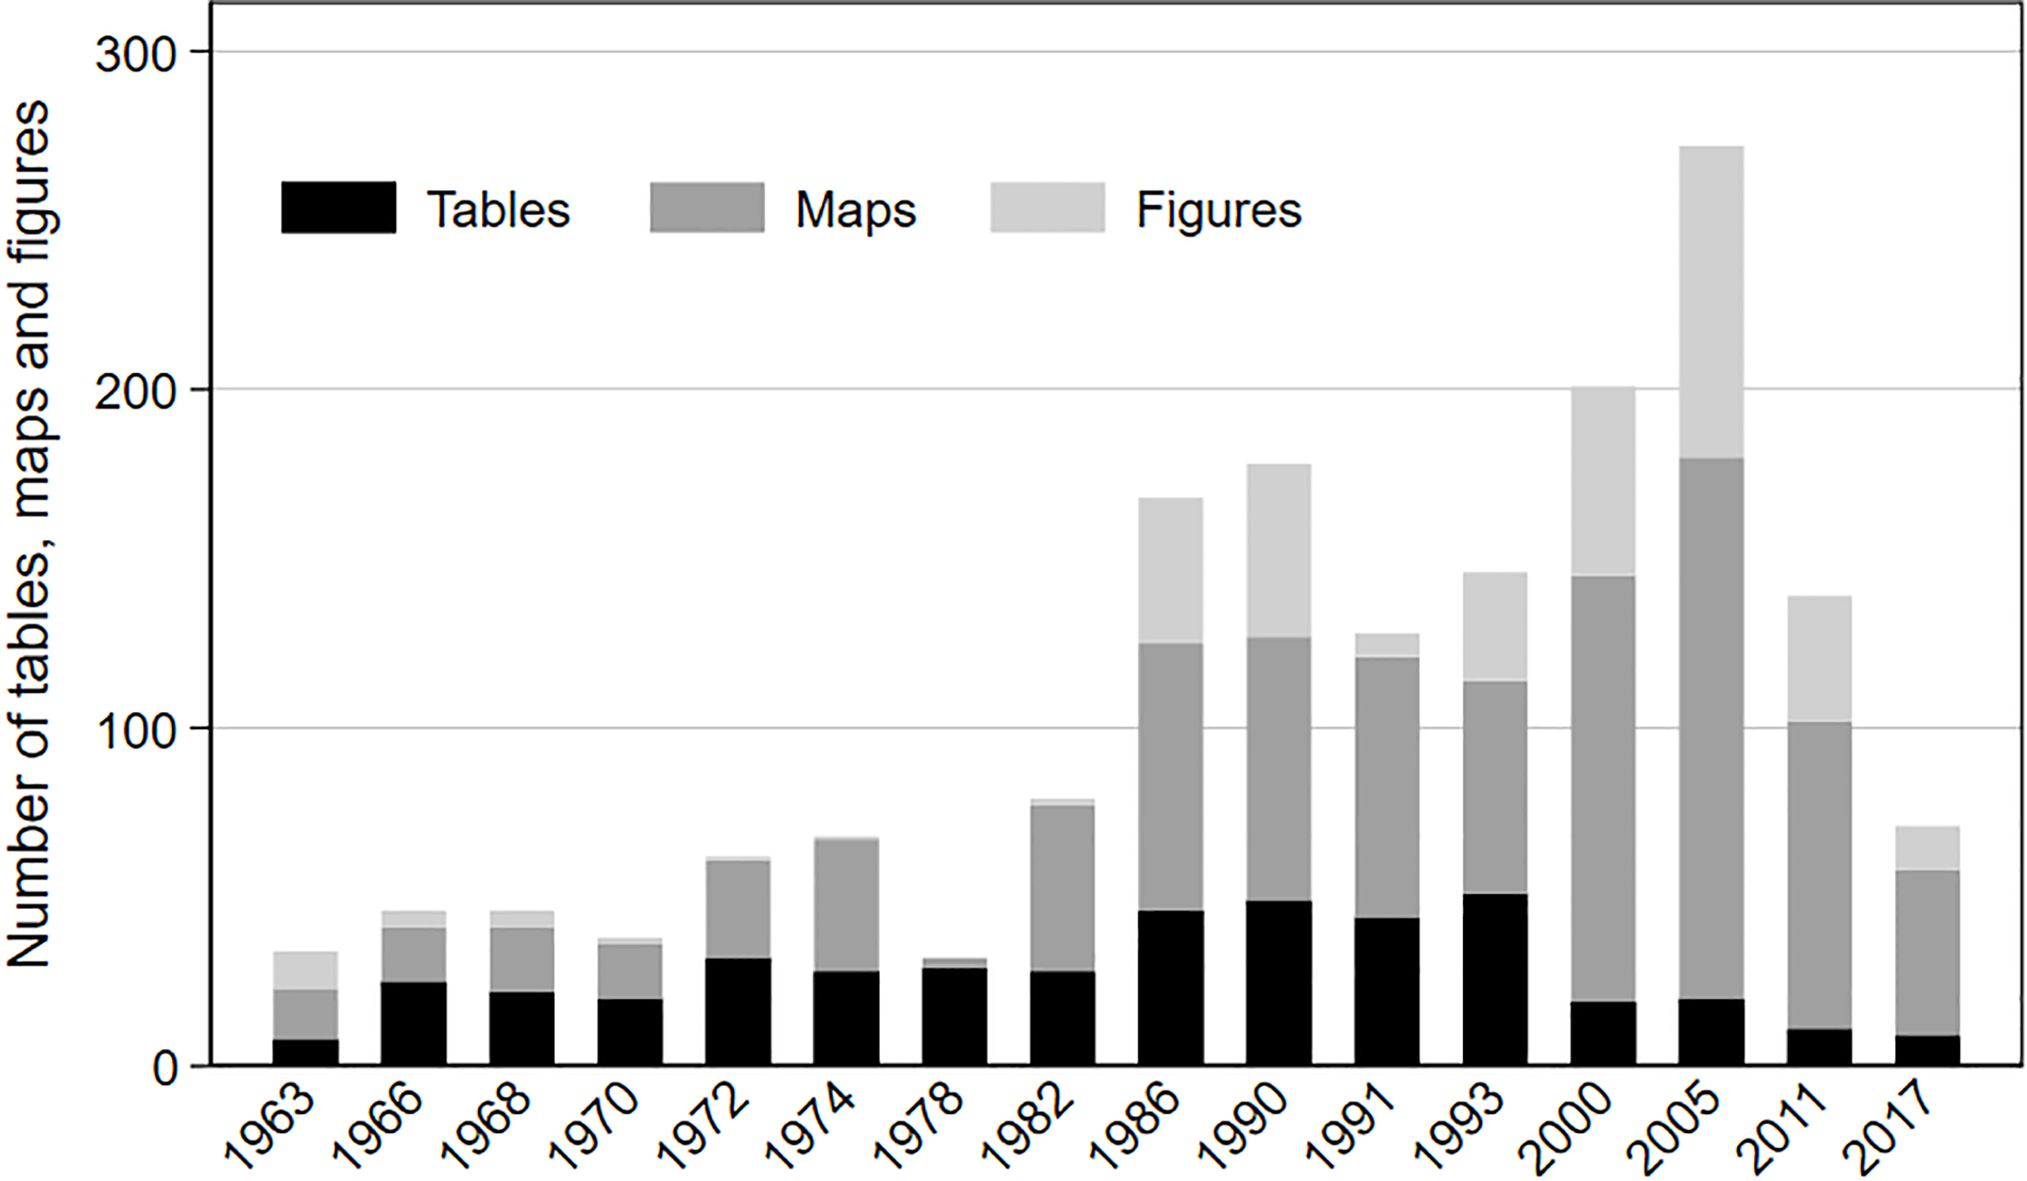 Number of figures, maps and tables per Spatial Planning Report (1963–2017).